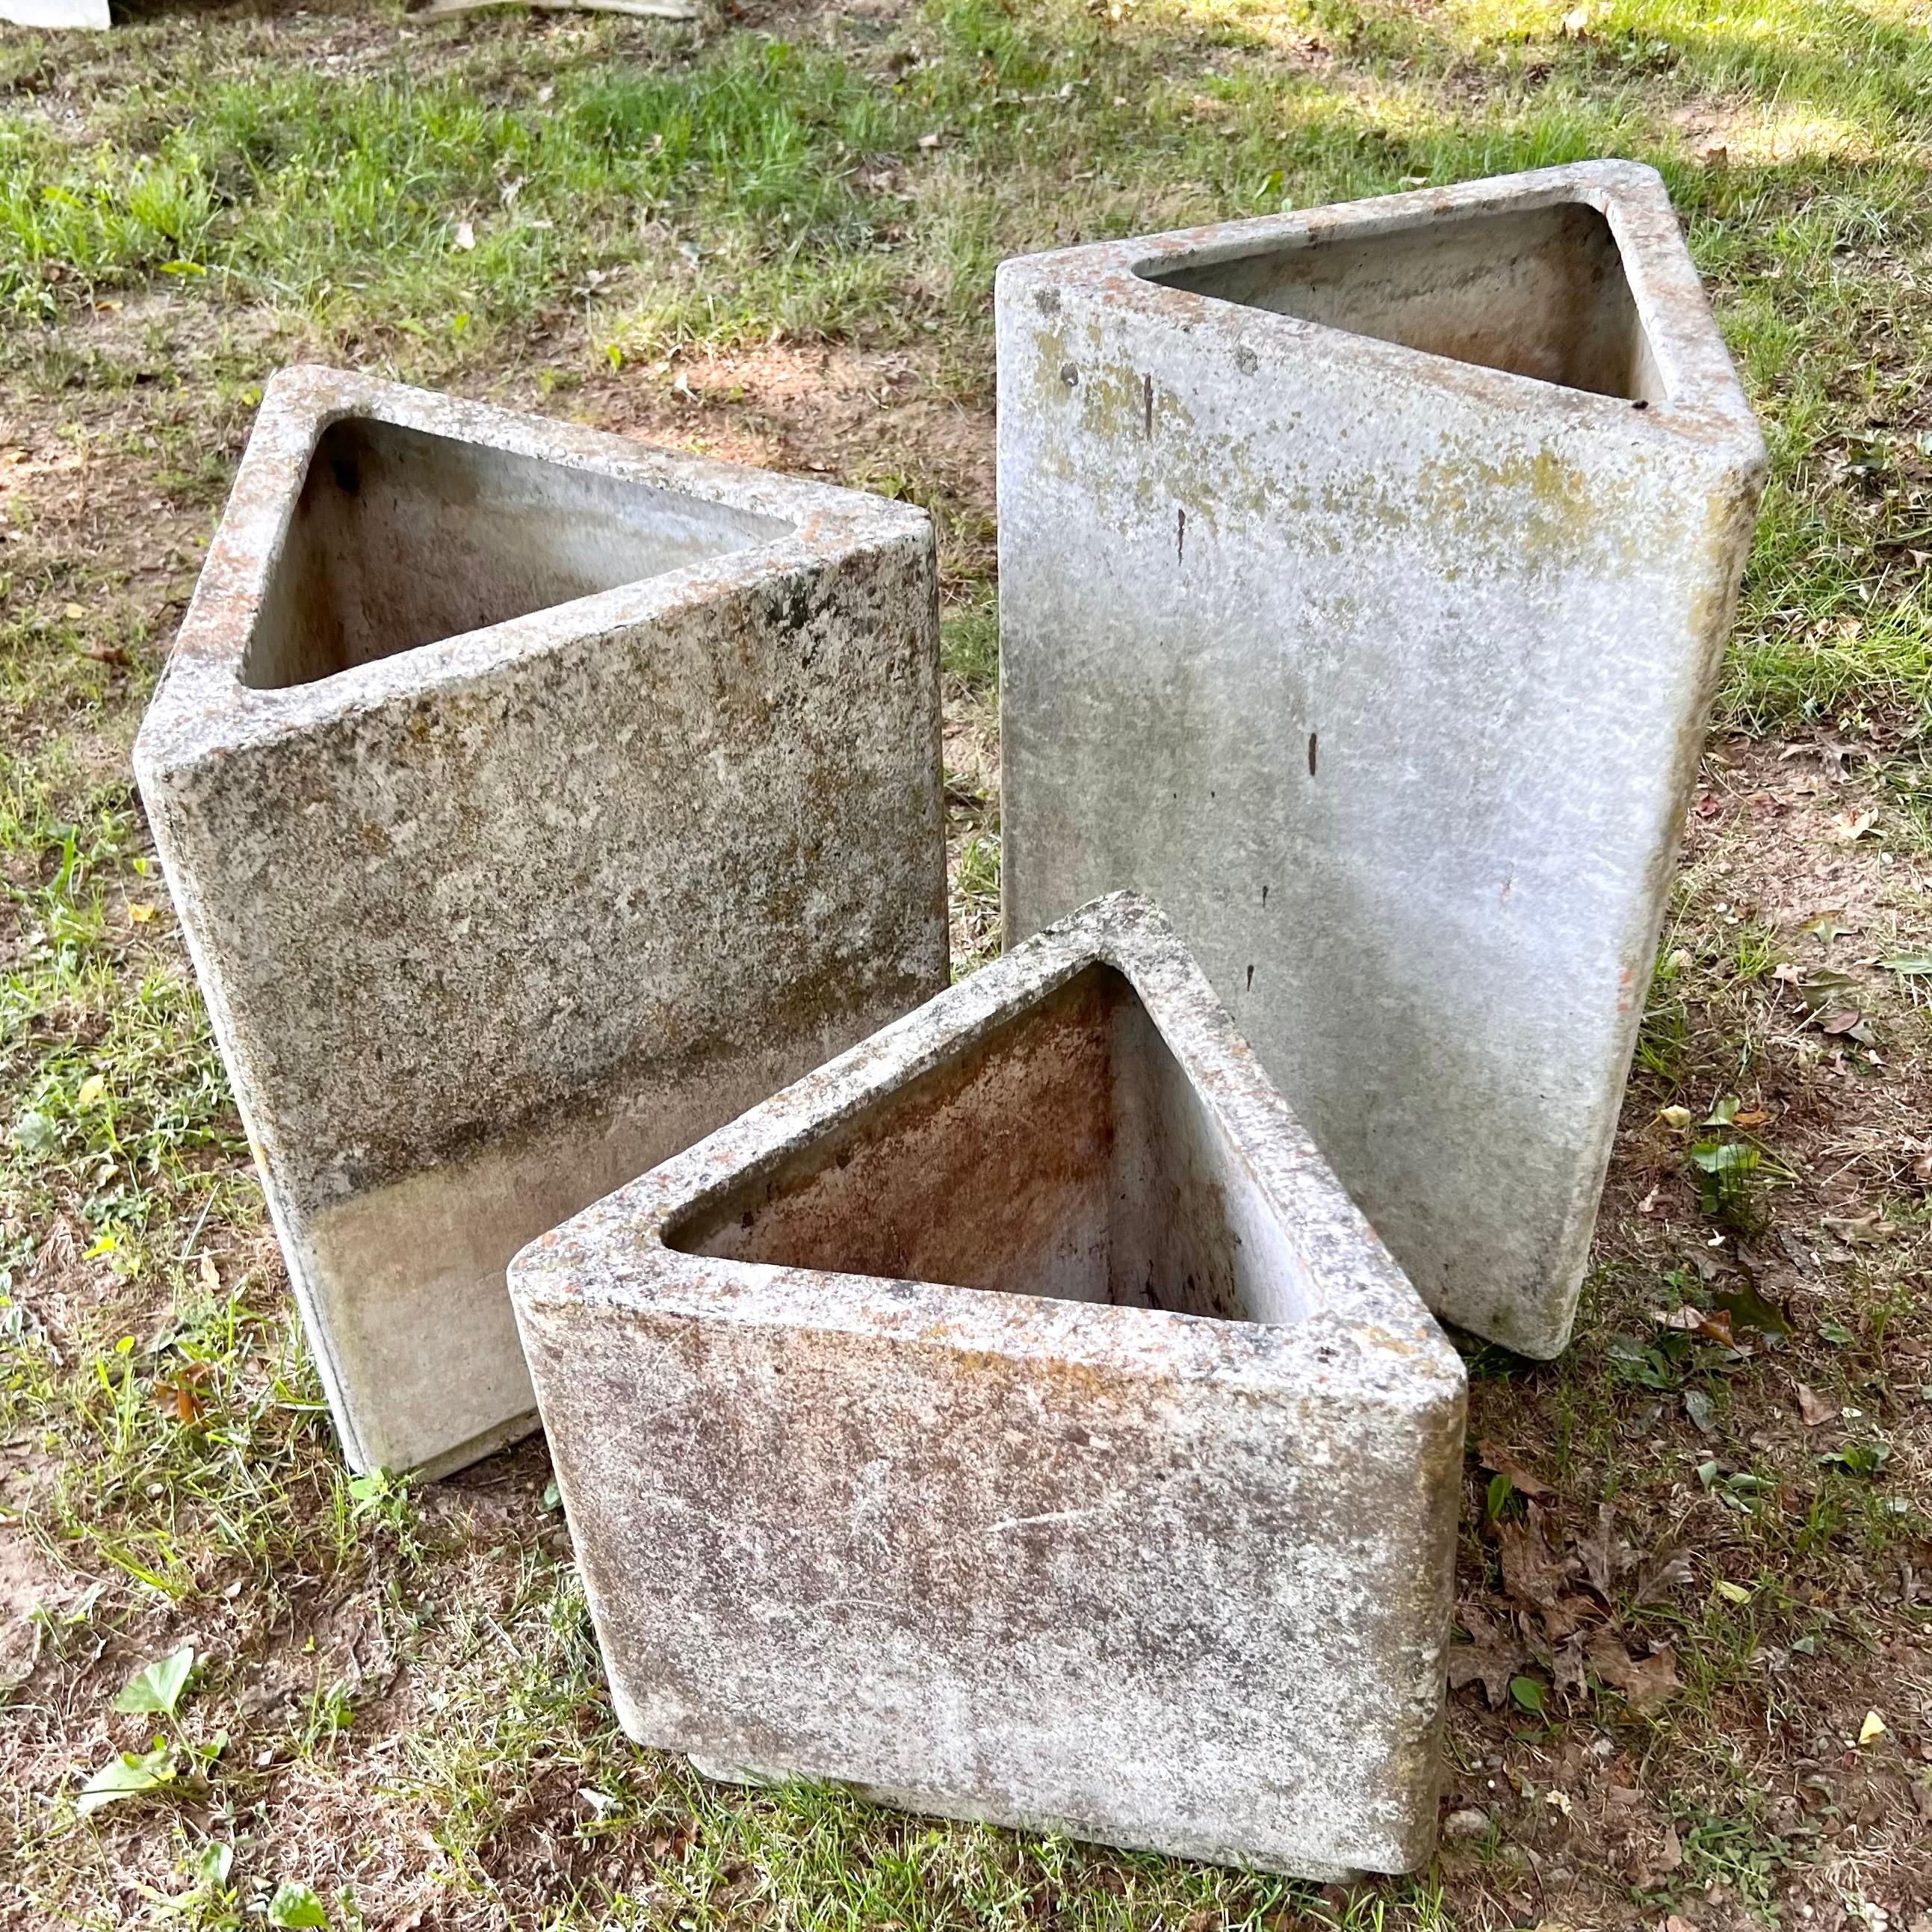 Rare set of 1960’s triangular concrete planters designed by Swiss neo-functionalist and industrial design pioneer Willy Guhl for Eternit in Switzerland.

Each multifaceted planter can be arranged in a multitude of ways. Each triangle sits atop